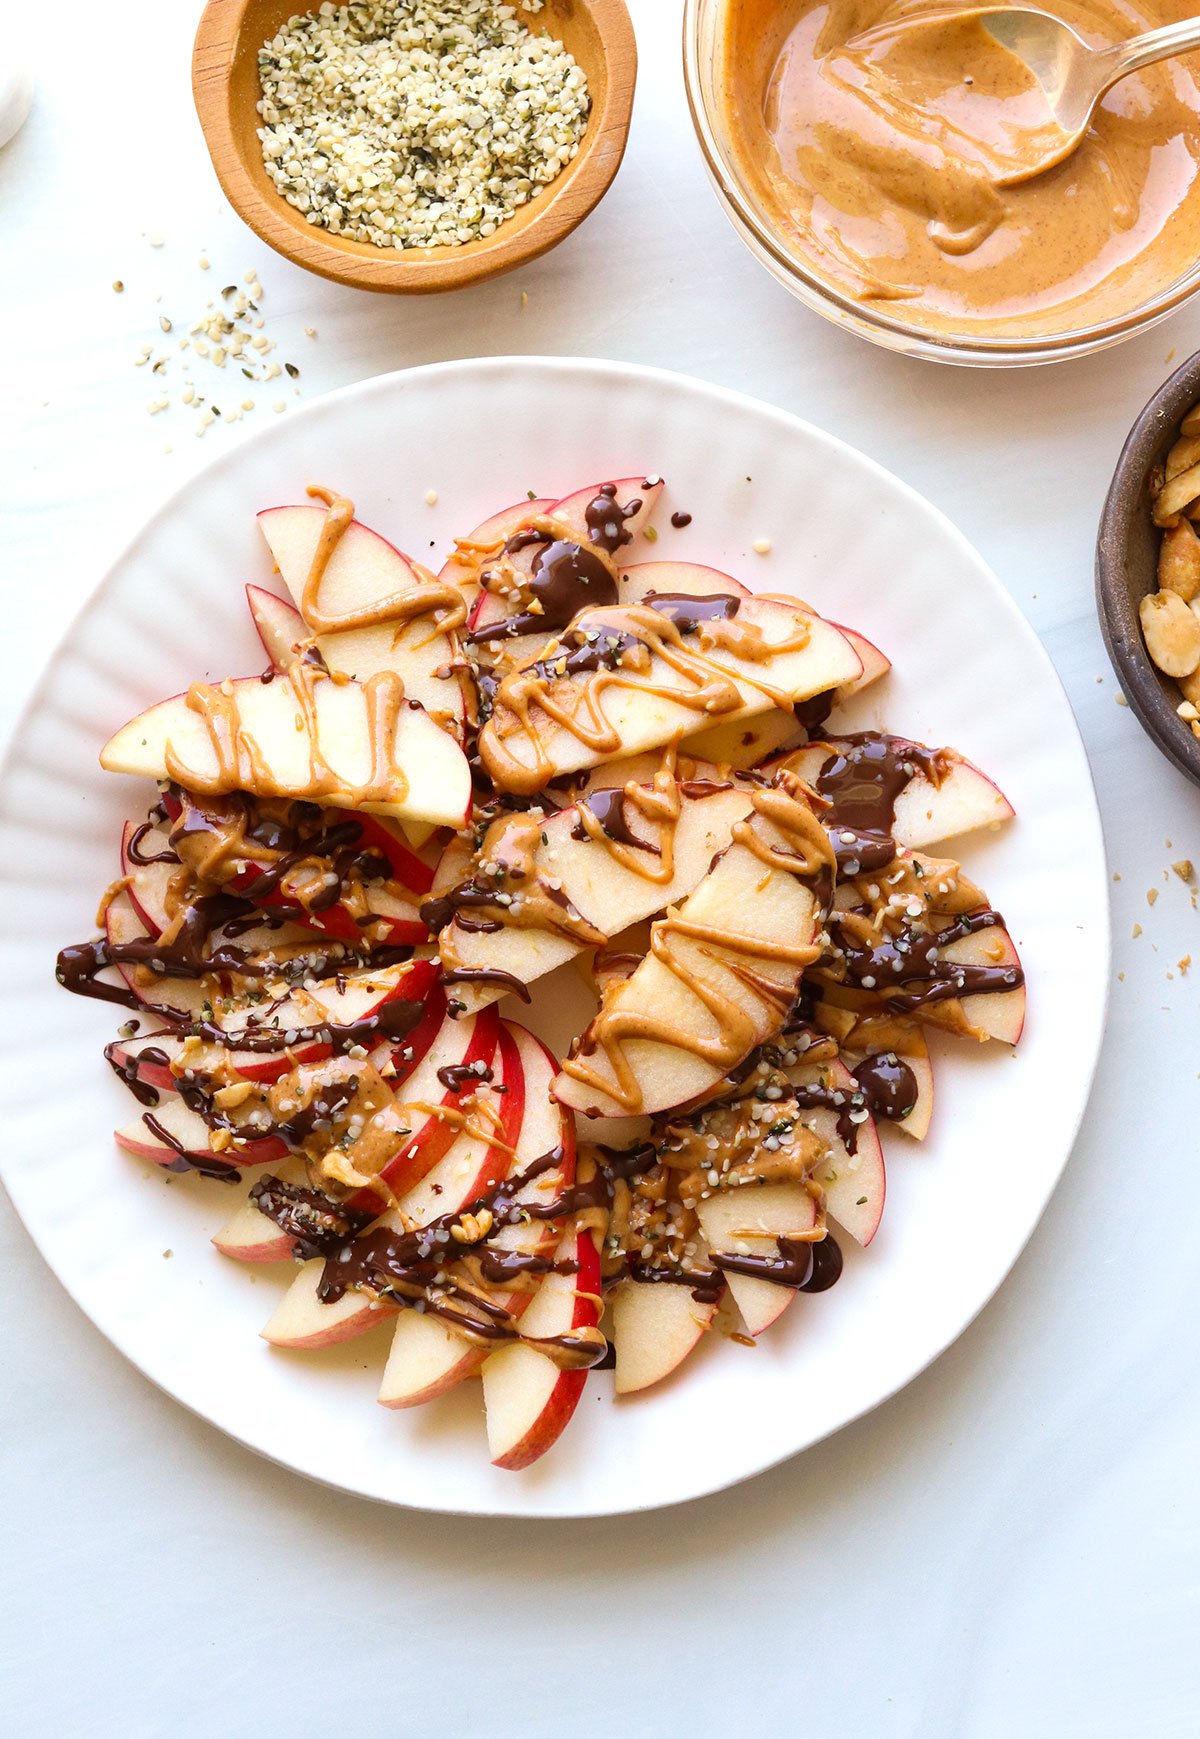 apple nachos served on a white plate with peanut butter and melted chocolate drizzle.